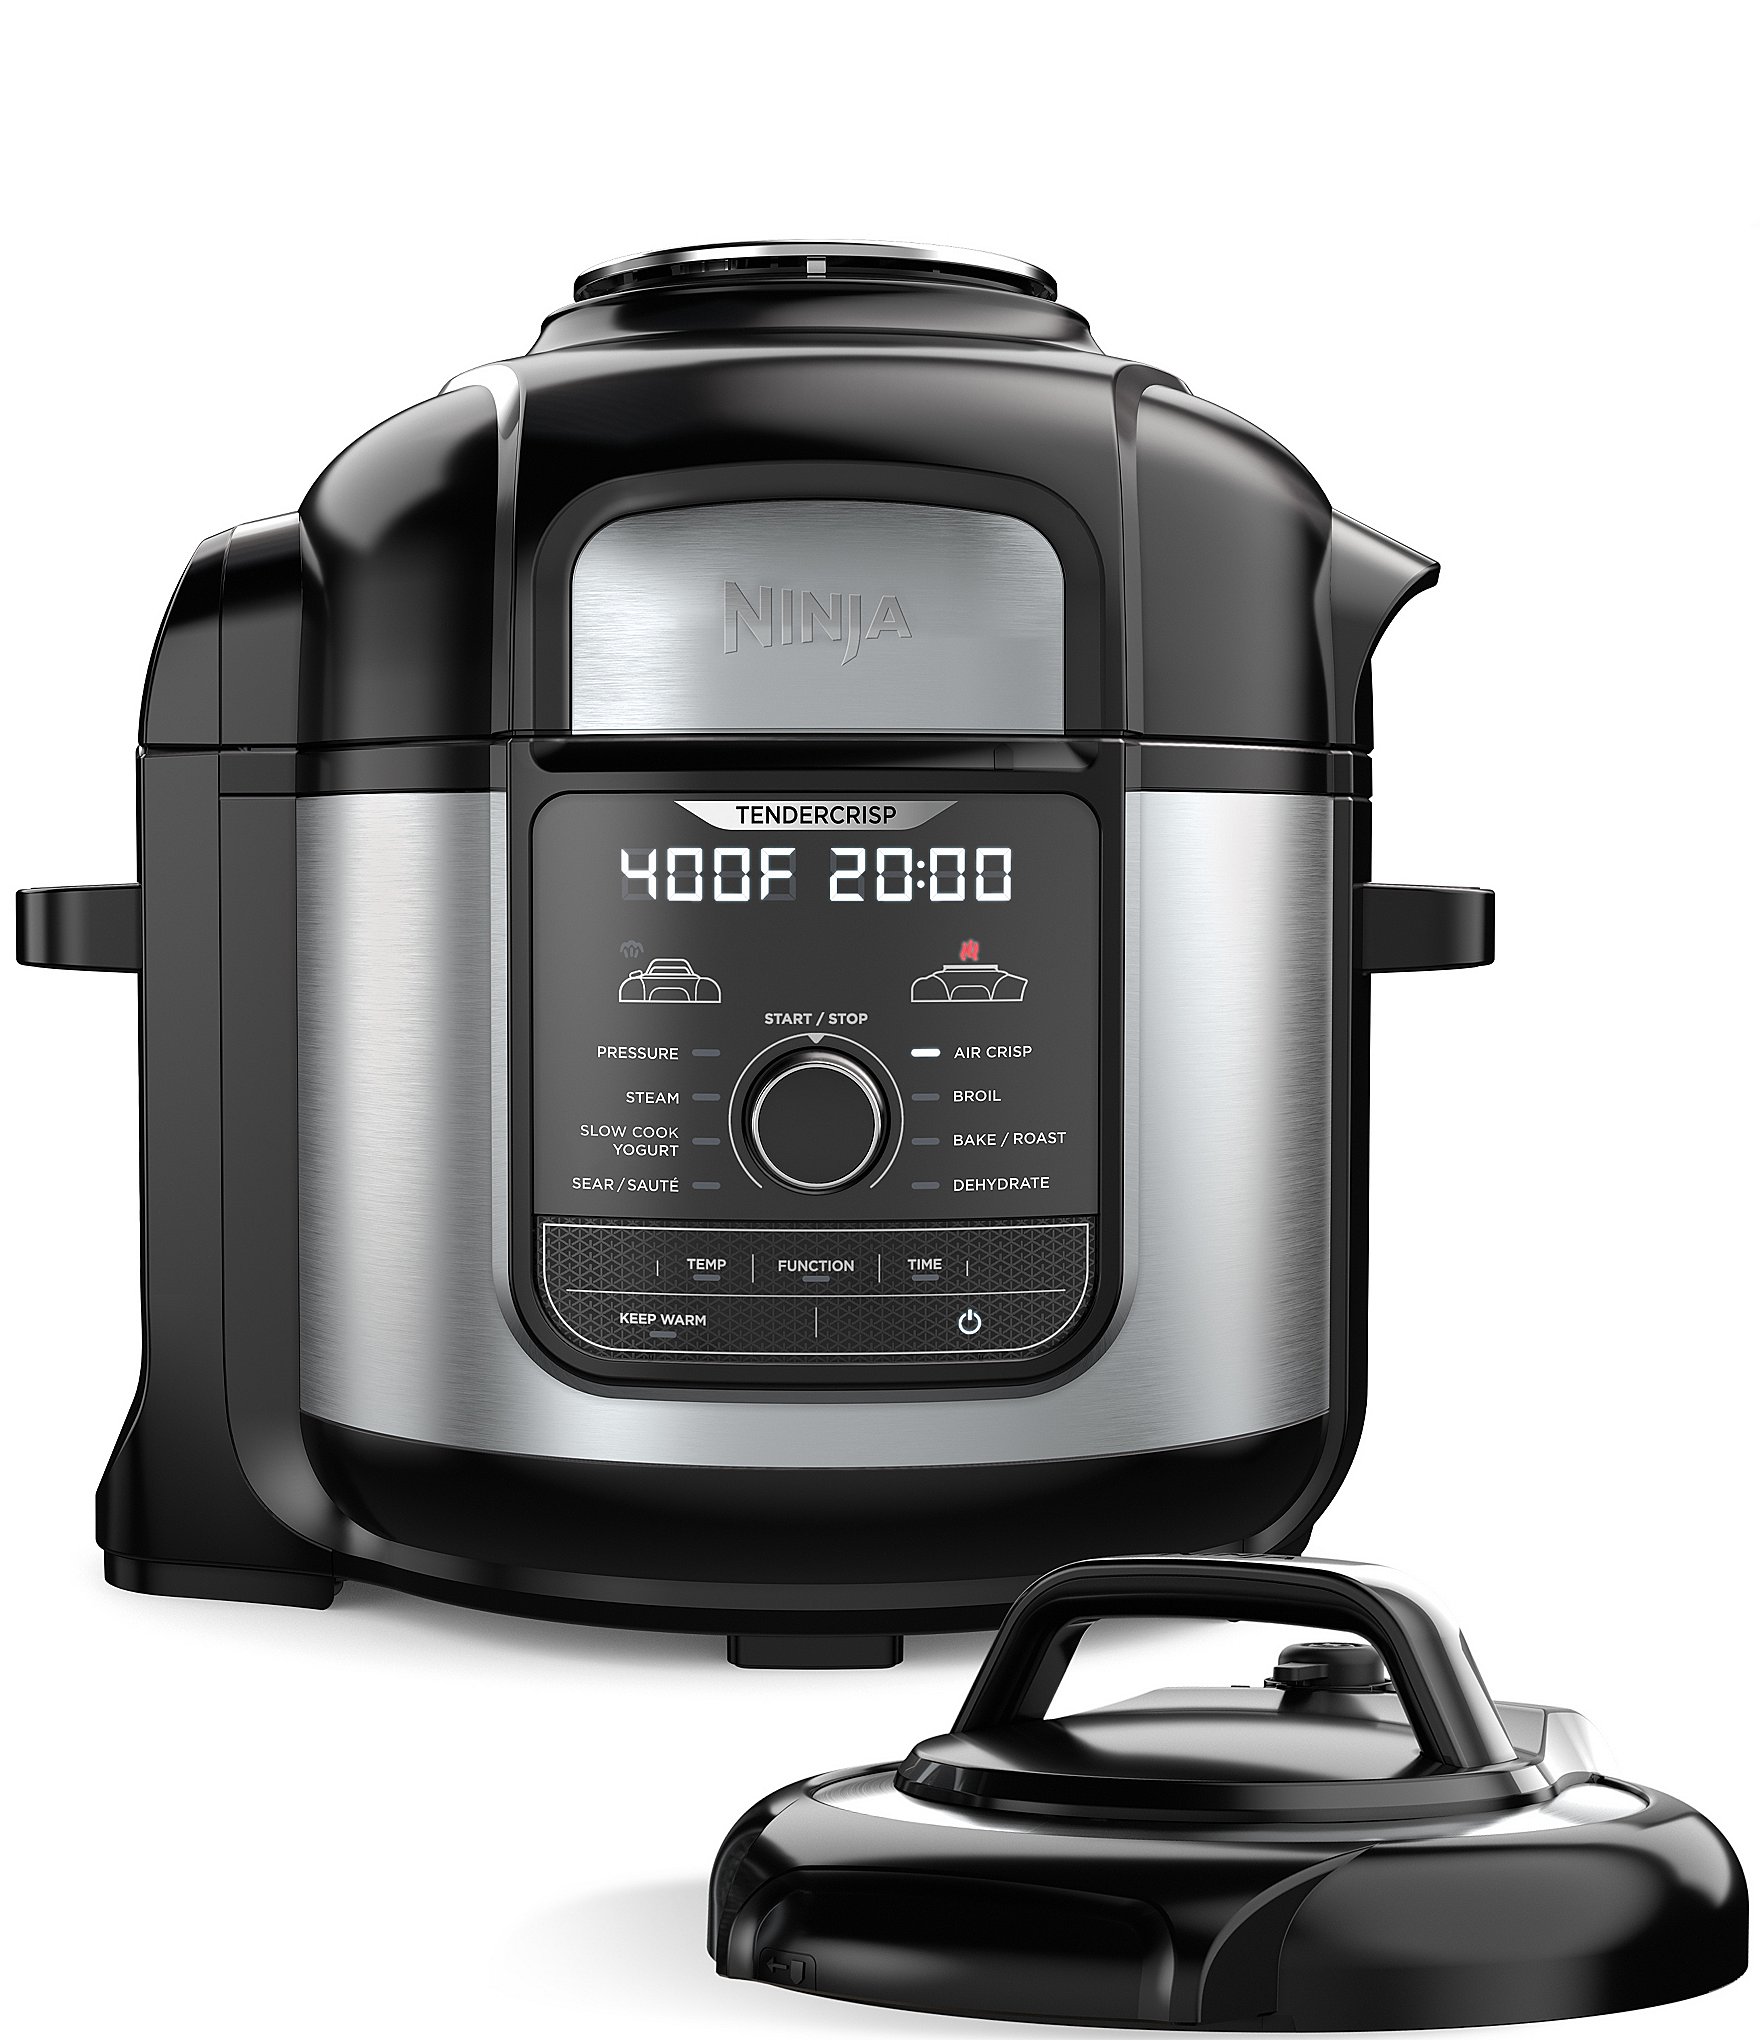 Why The Ninja Foodi Pressure Cooker Is A Must For The THM Kitchen